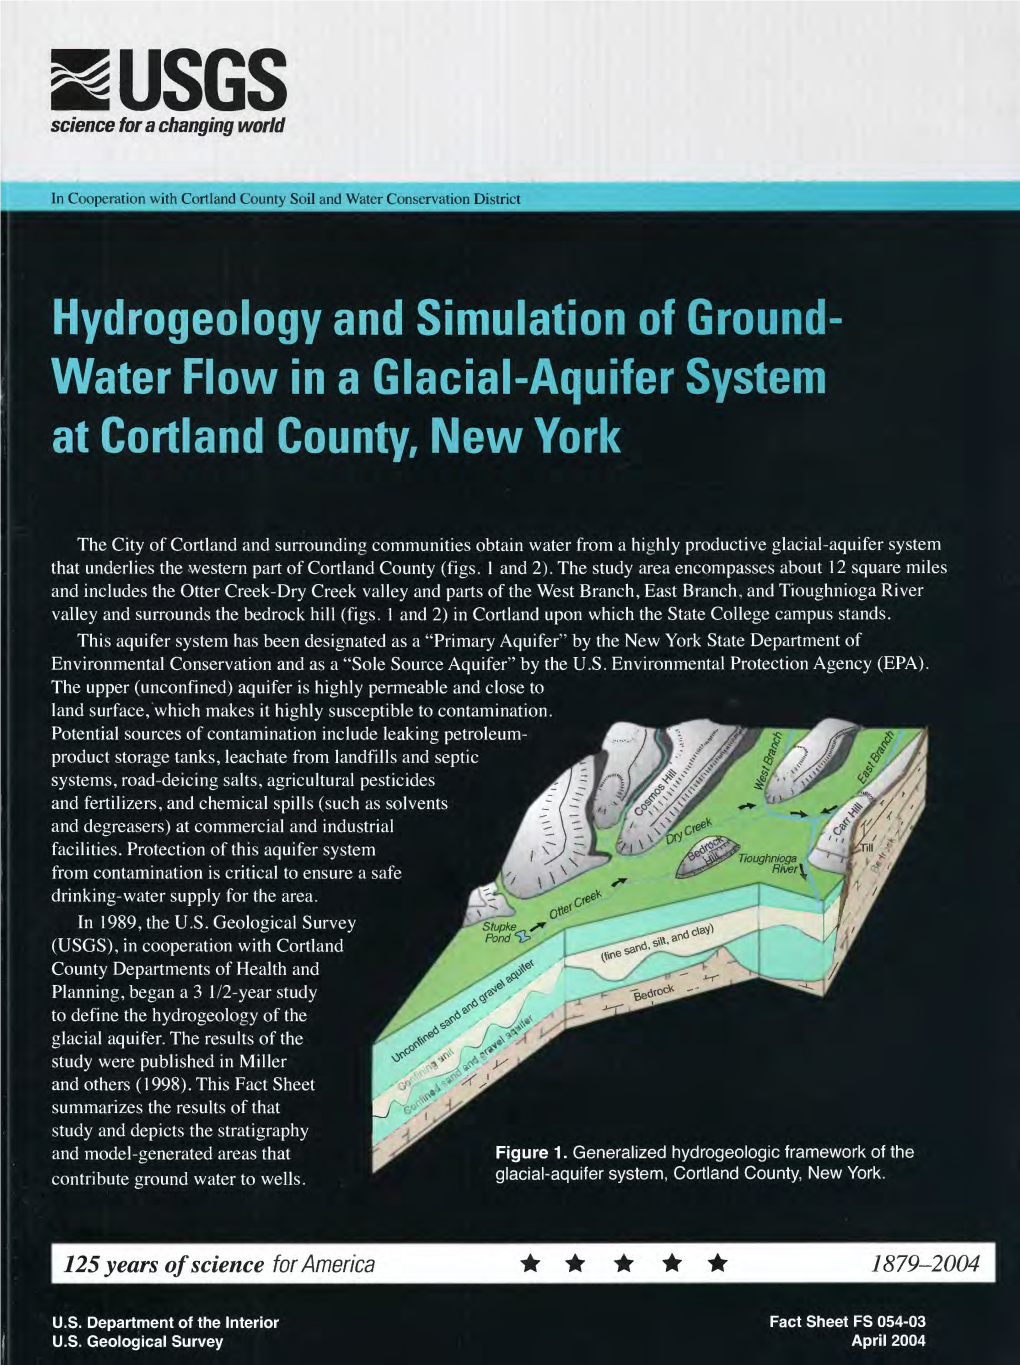 Water Flow in a Glacial-Aquifer System at Cortland County, New York